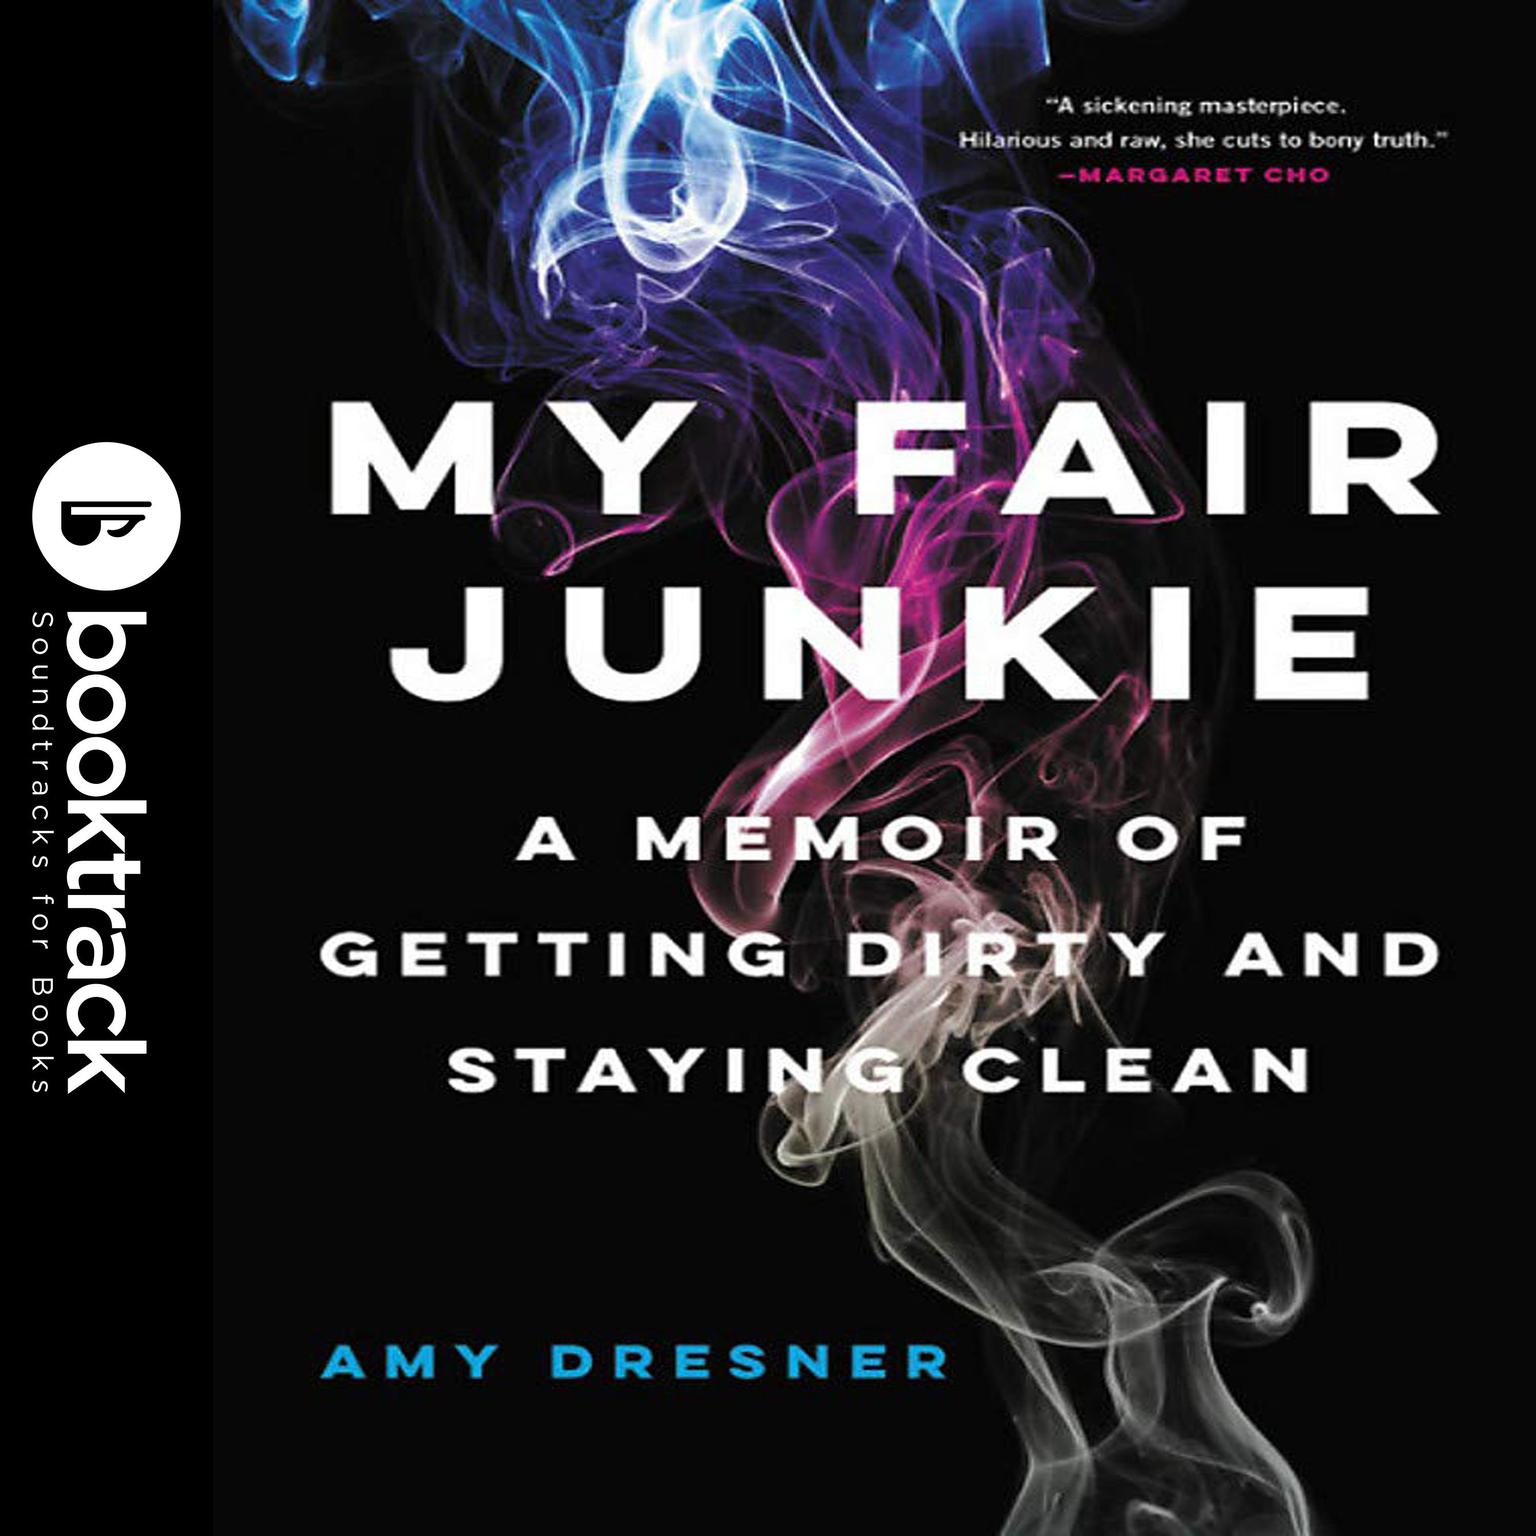 My Fair Junkie: A Memoir of Getting Dirty and Staying Clean Audiobook, by Amy Dresner